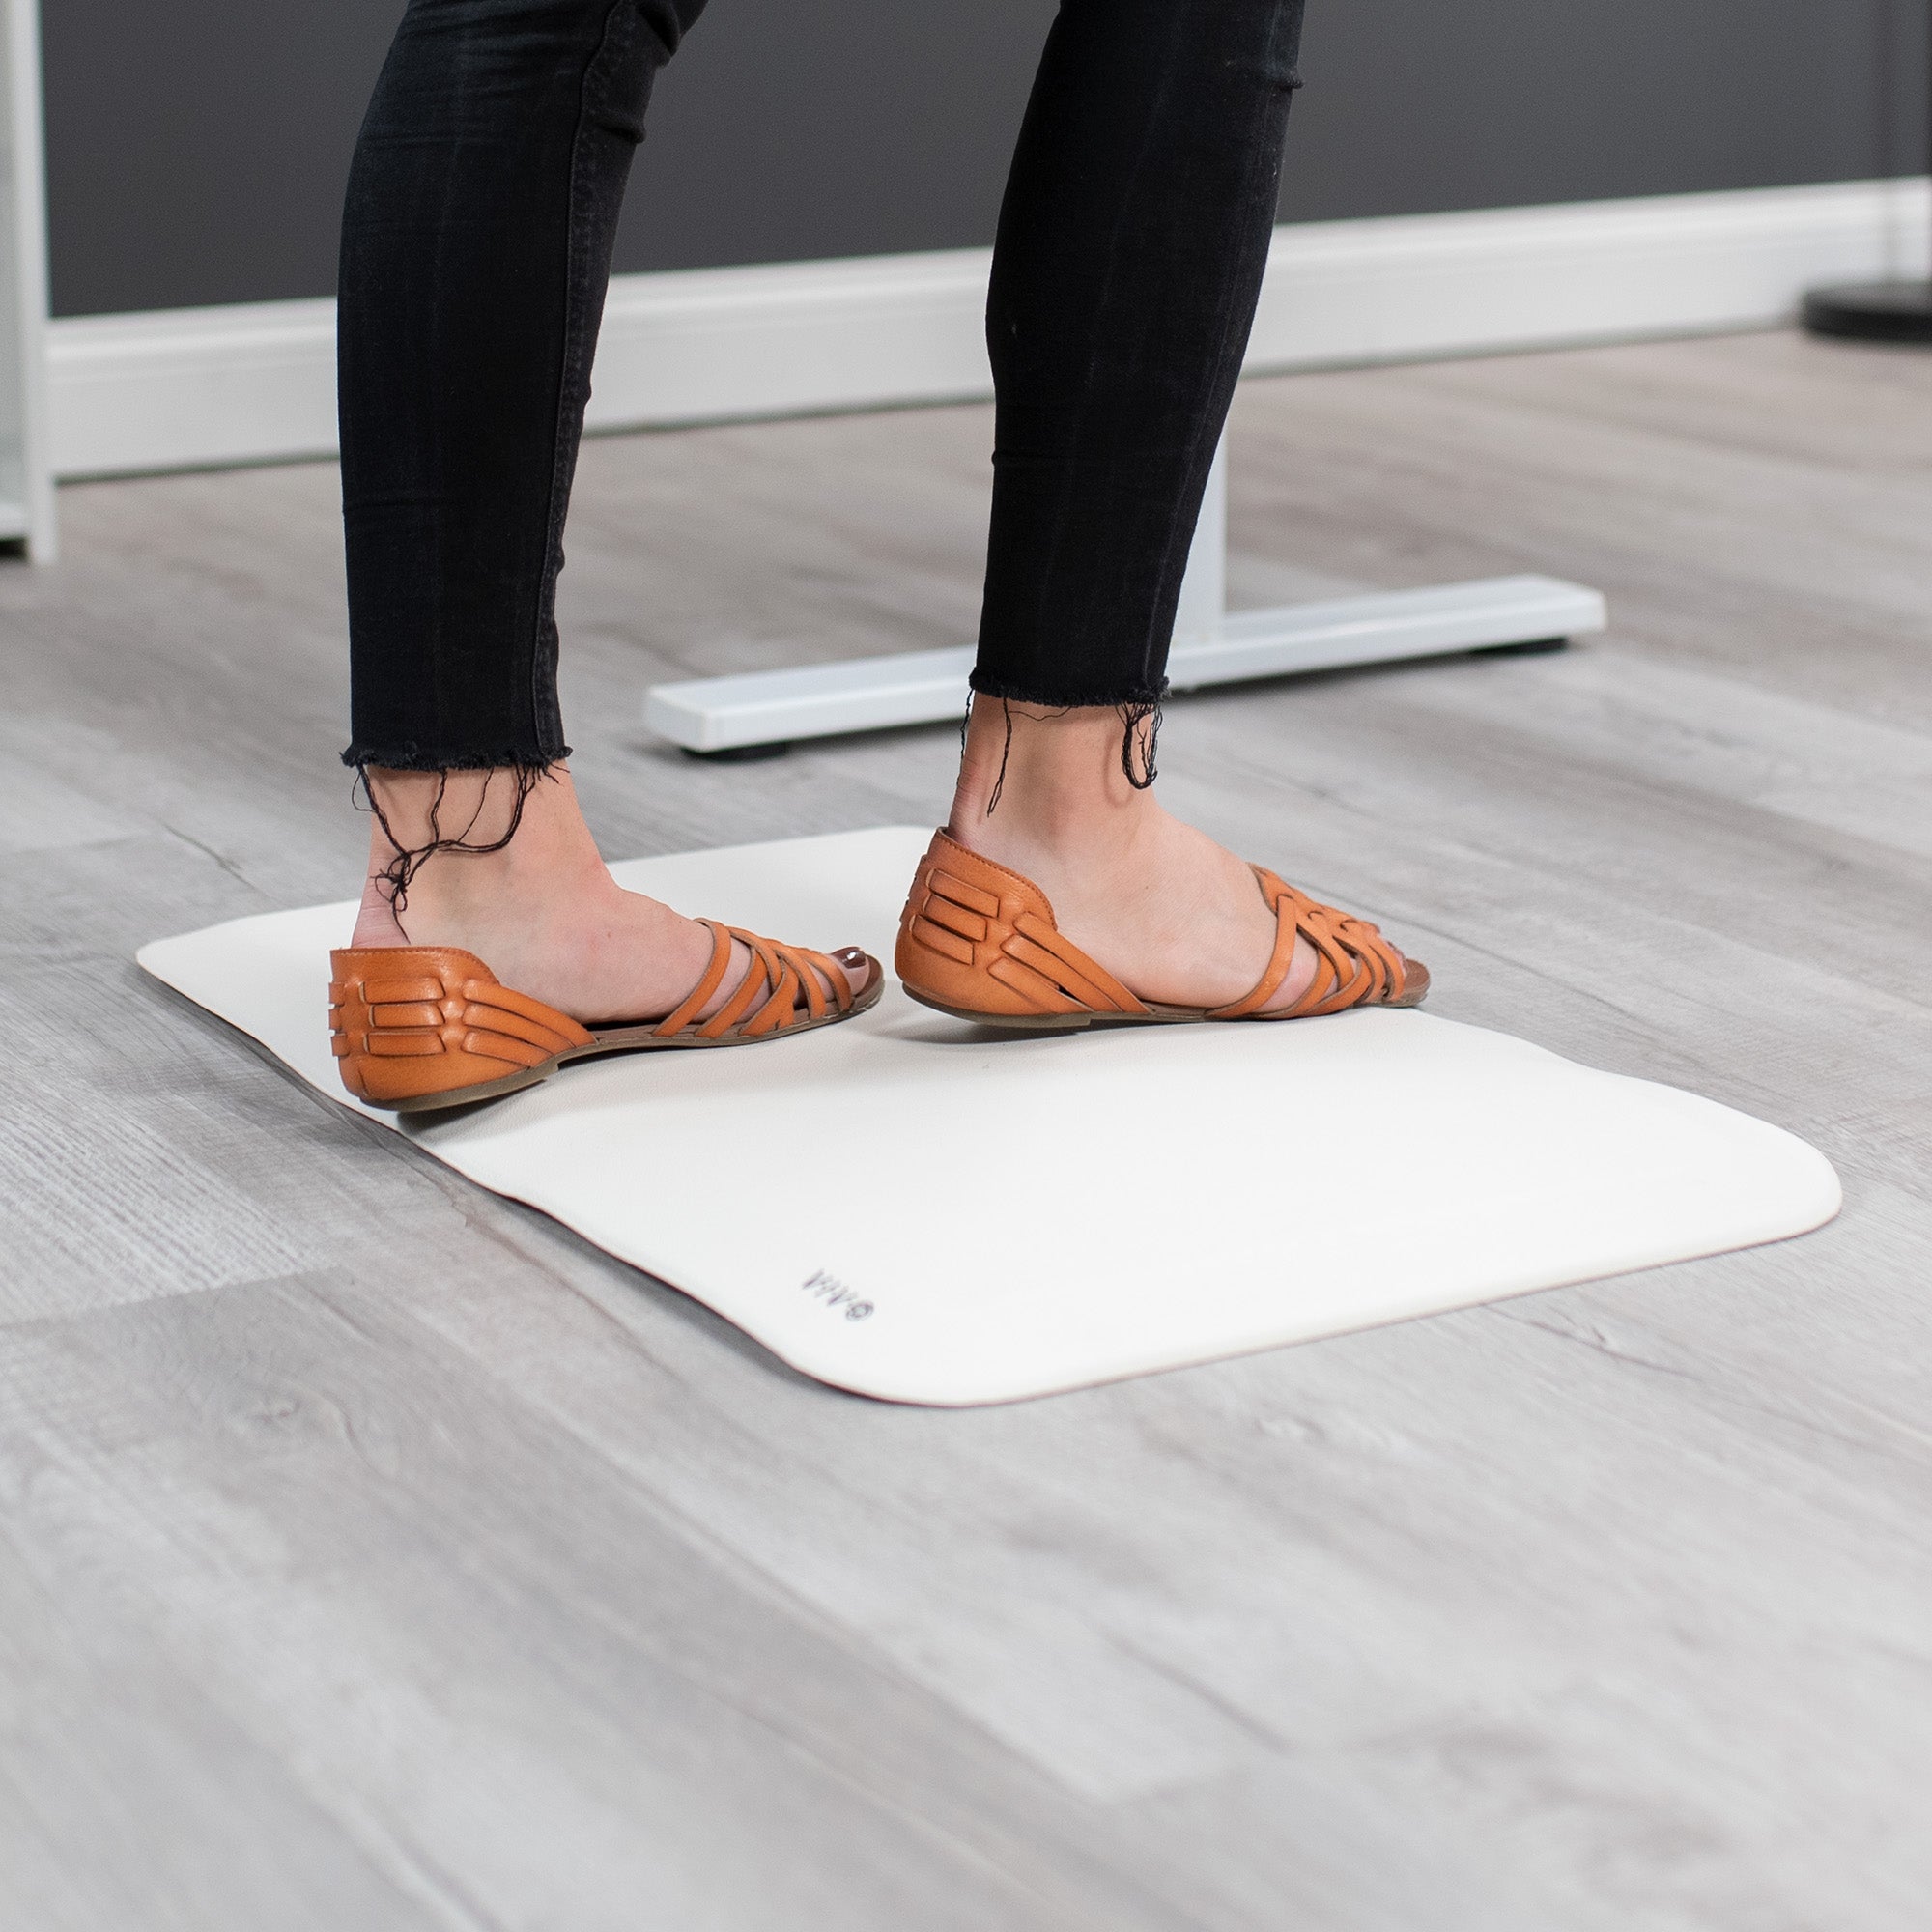  Vive Anti Fatigue Standing Mat - Foot Support for Desk